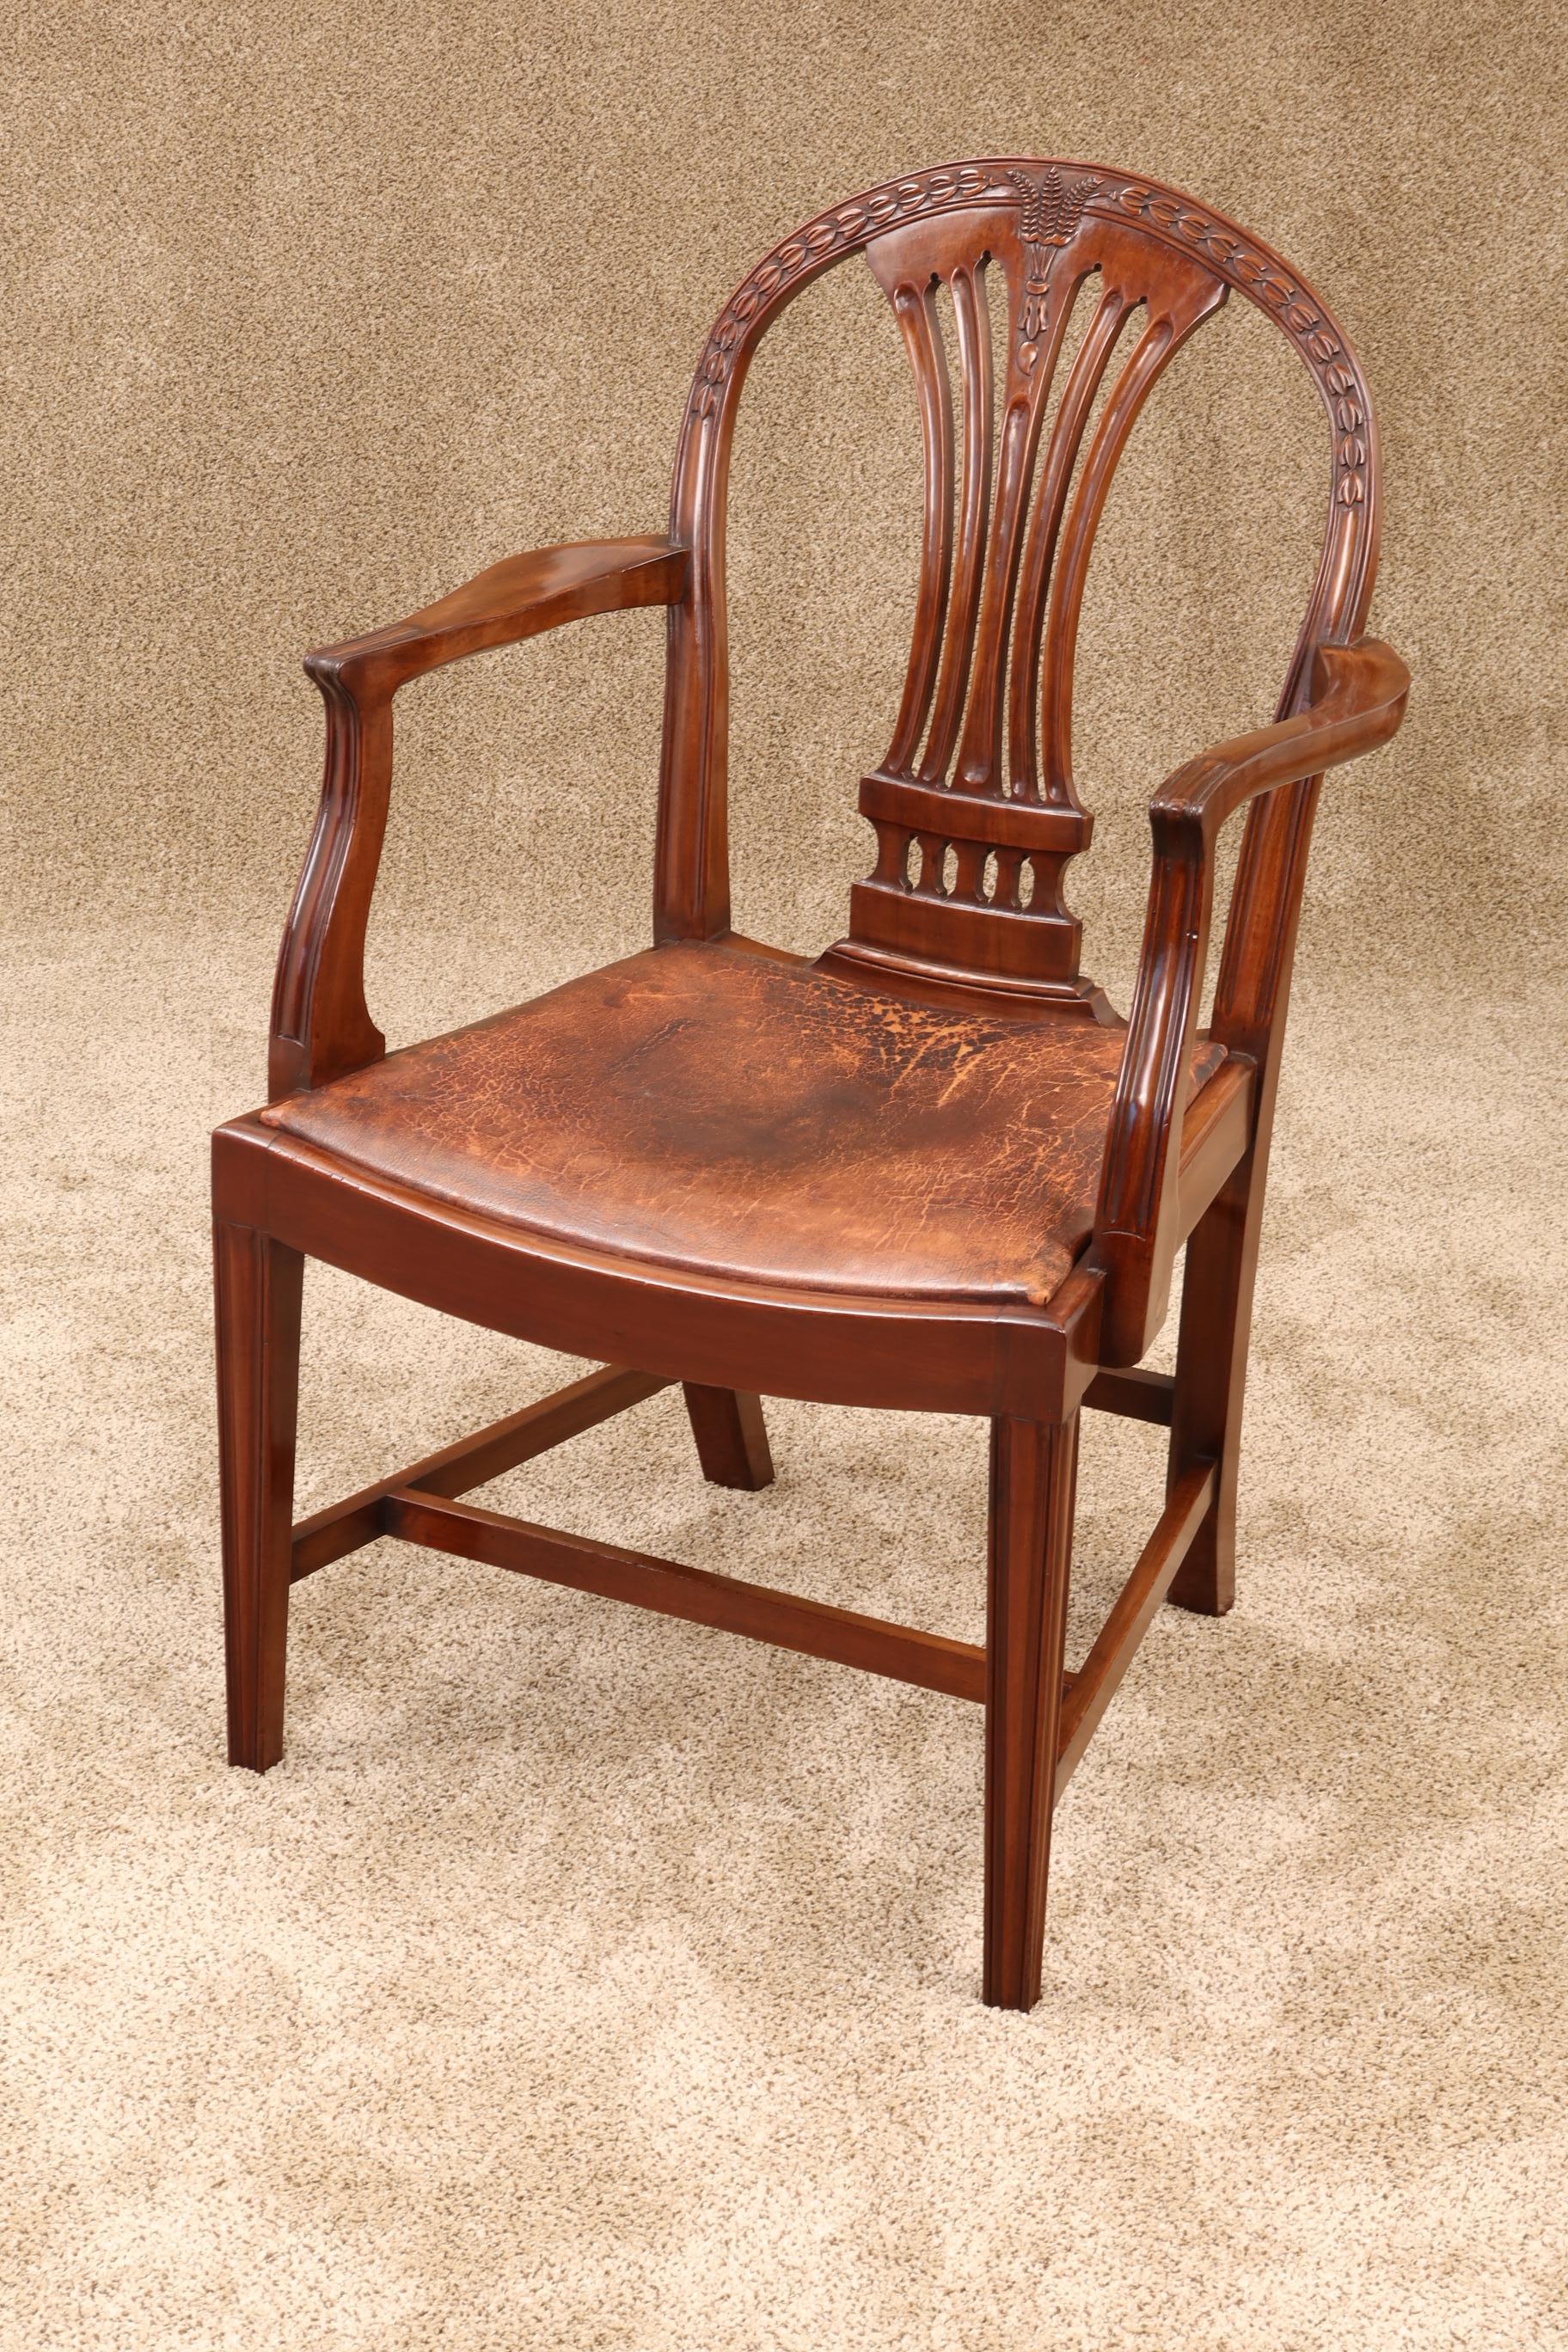 An exceptional set of English Hepplewhite style dining chairs. Many things set these chairs apart from others. The mahogany is particularly dense and heavy and takes the carved detail very well. The hooped backs are carved with wheat and bell